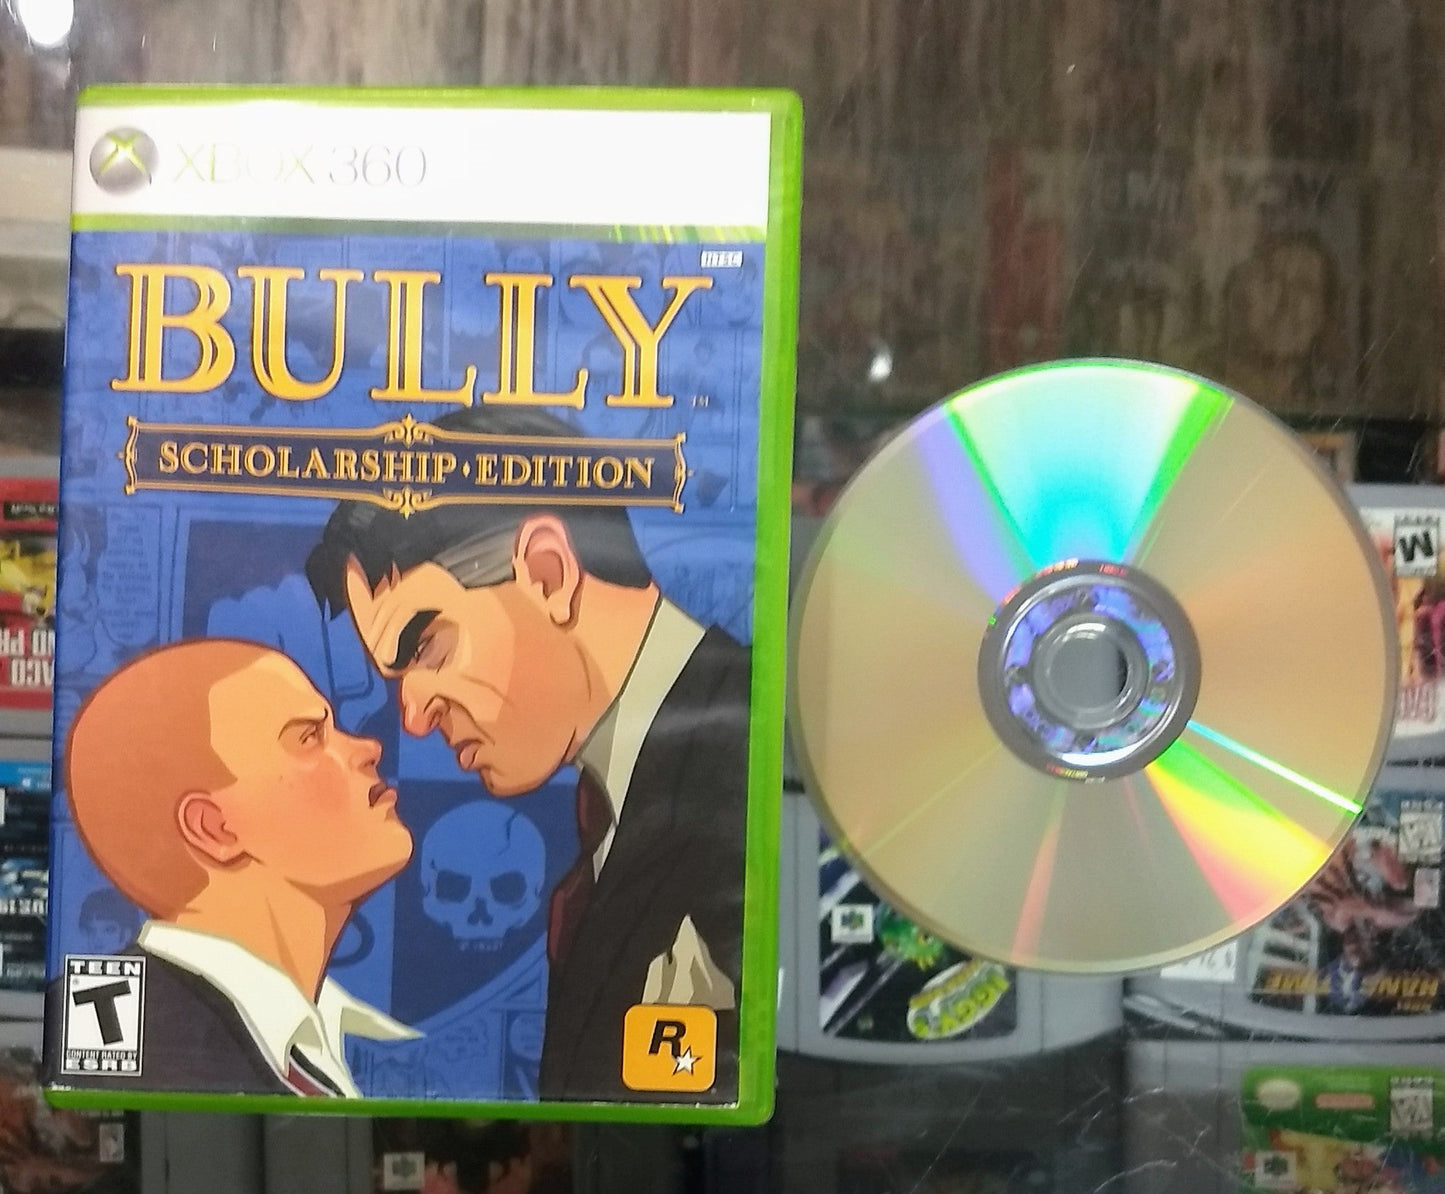 BULLY SCHOLARSHIP EDITION (XBOX 360 X360) - jeux video game-x